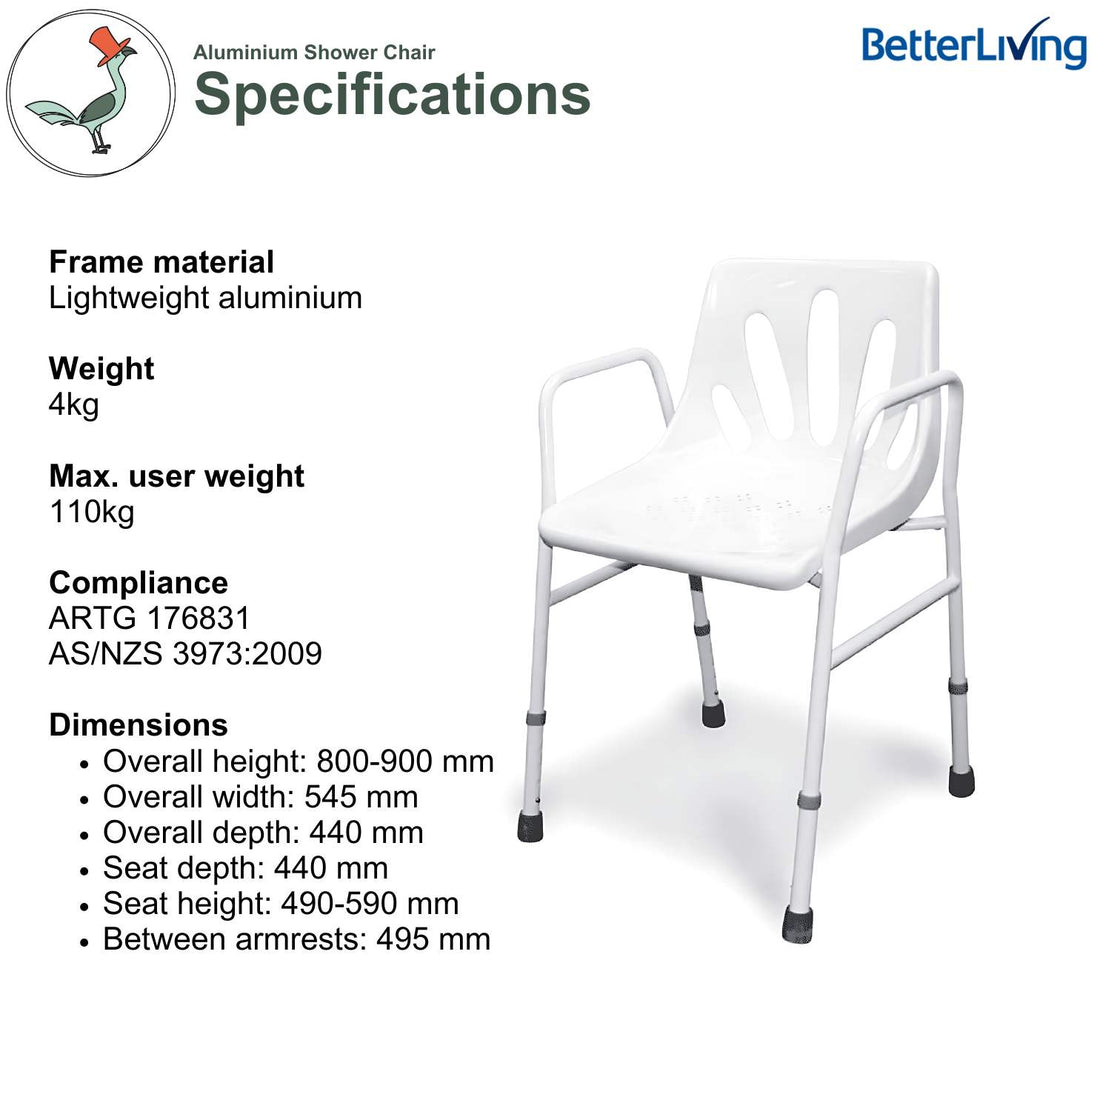 Specifications of the Aluminium Shower Chair